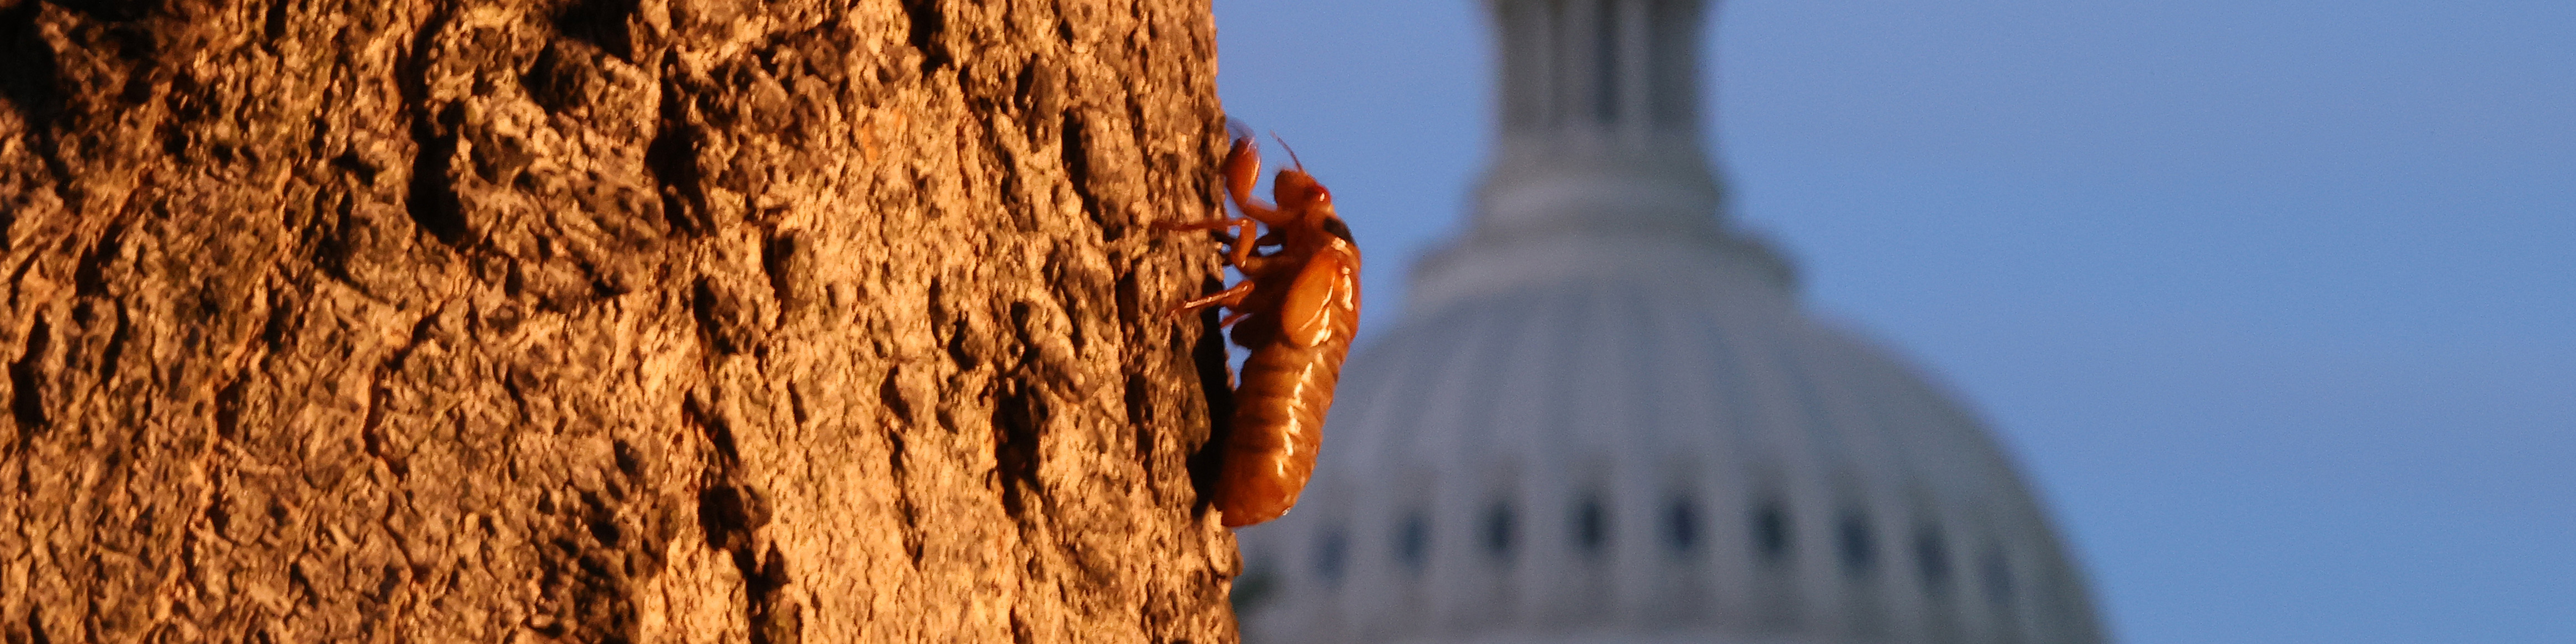 cicada nymph climbs a tree with the US Capitol dome seen in the background